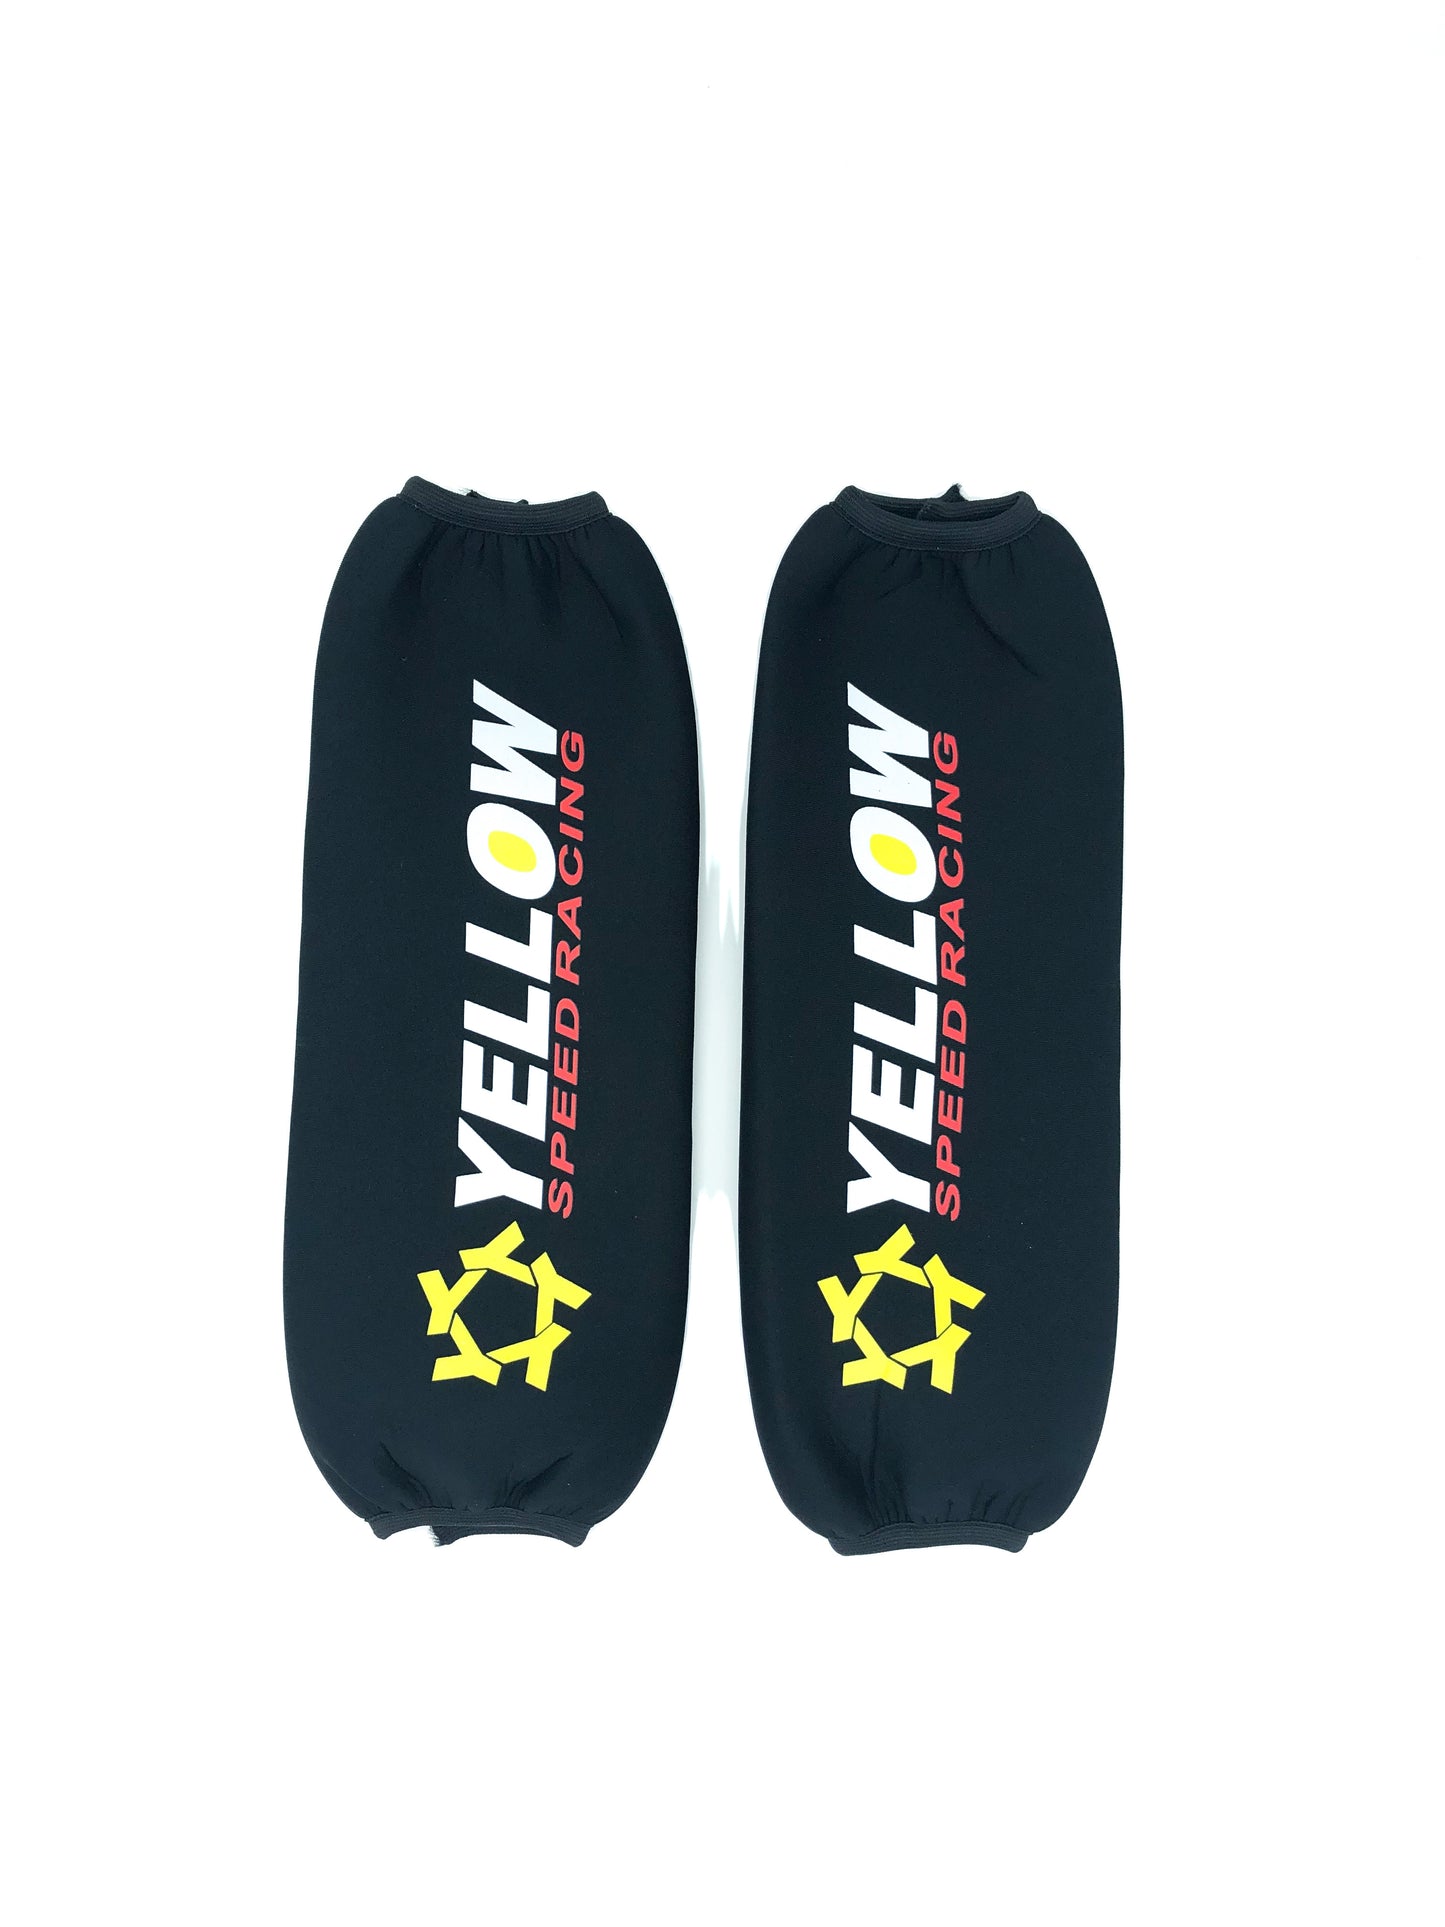 Yellow Speed Racing Coilover Suspension Shock Covers - Universal